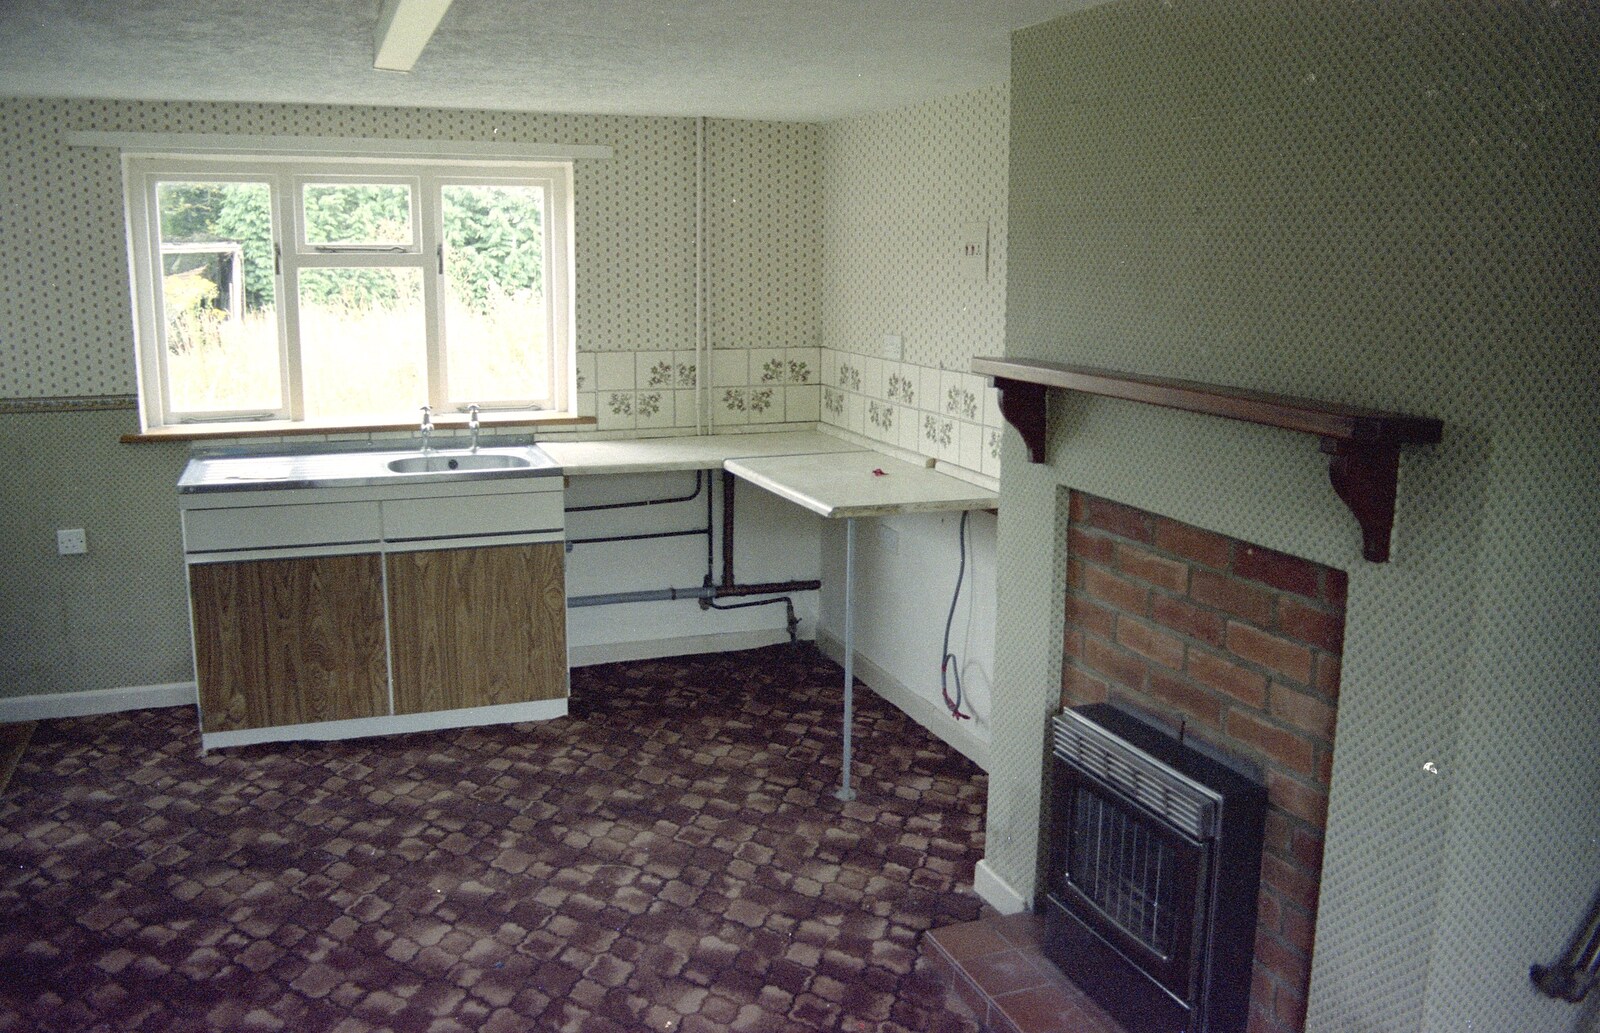 The extensively-fitted kitchen from Moving In, Brome, Suffolk - 10th April 1994